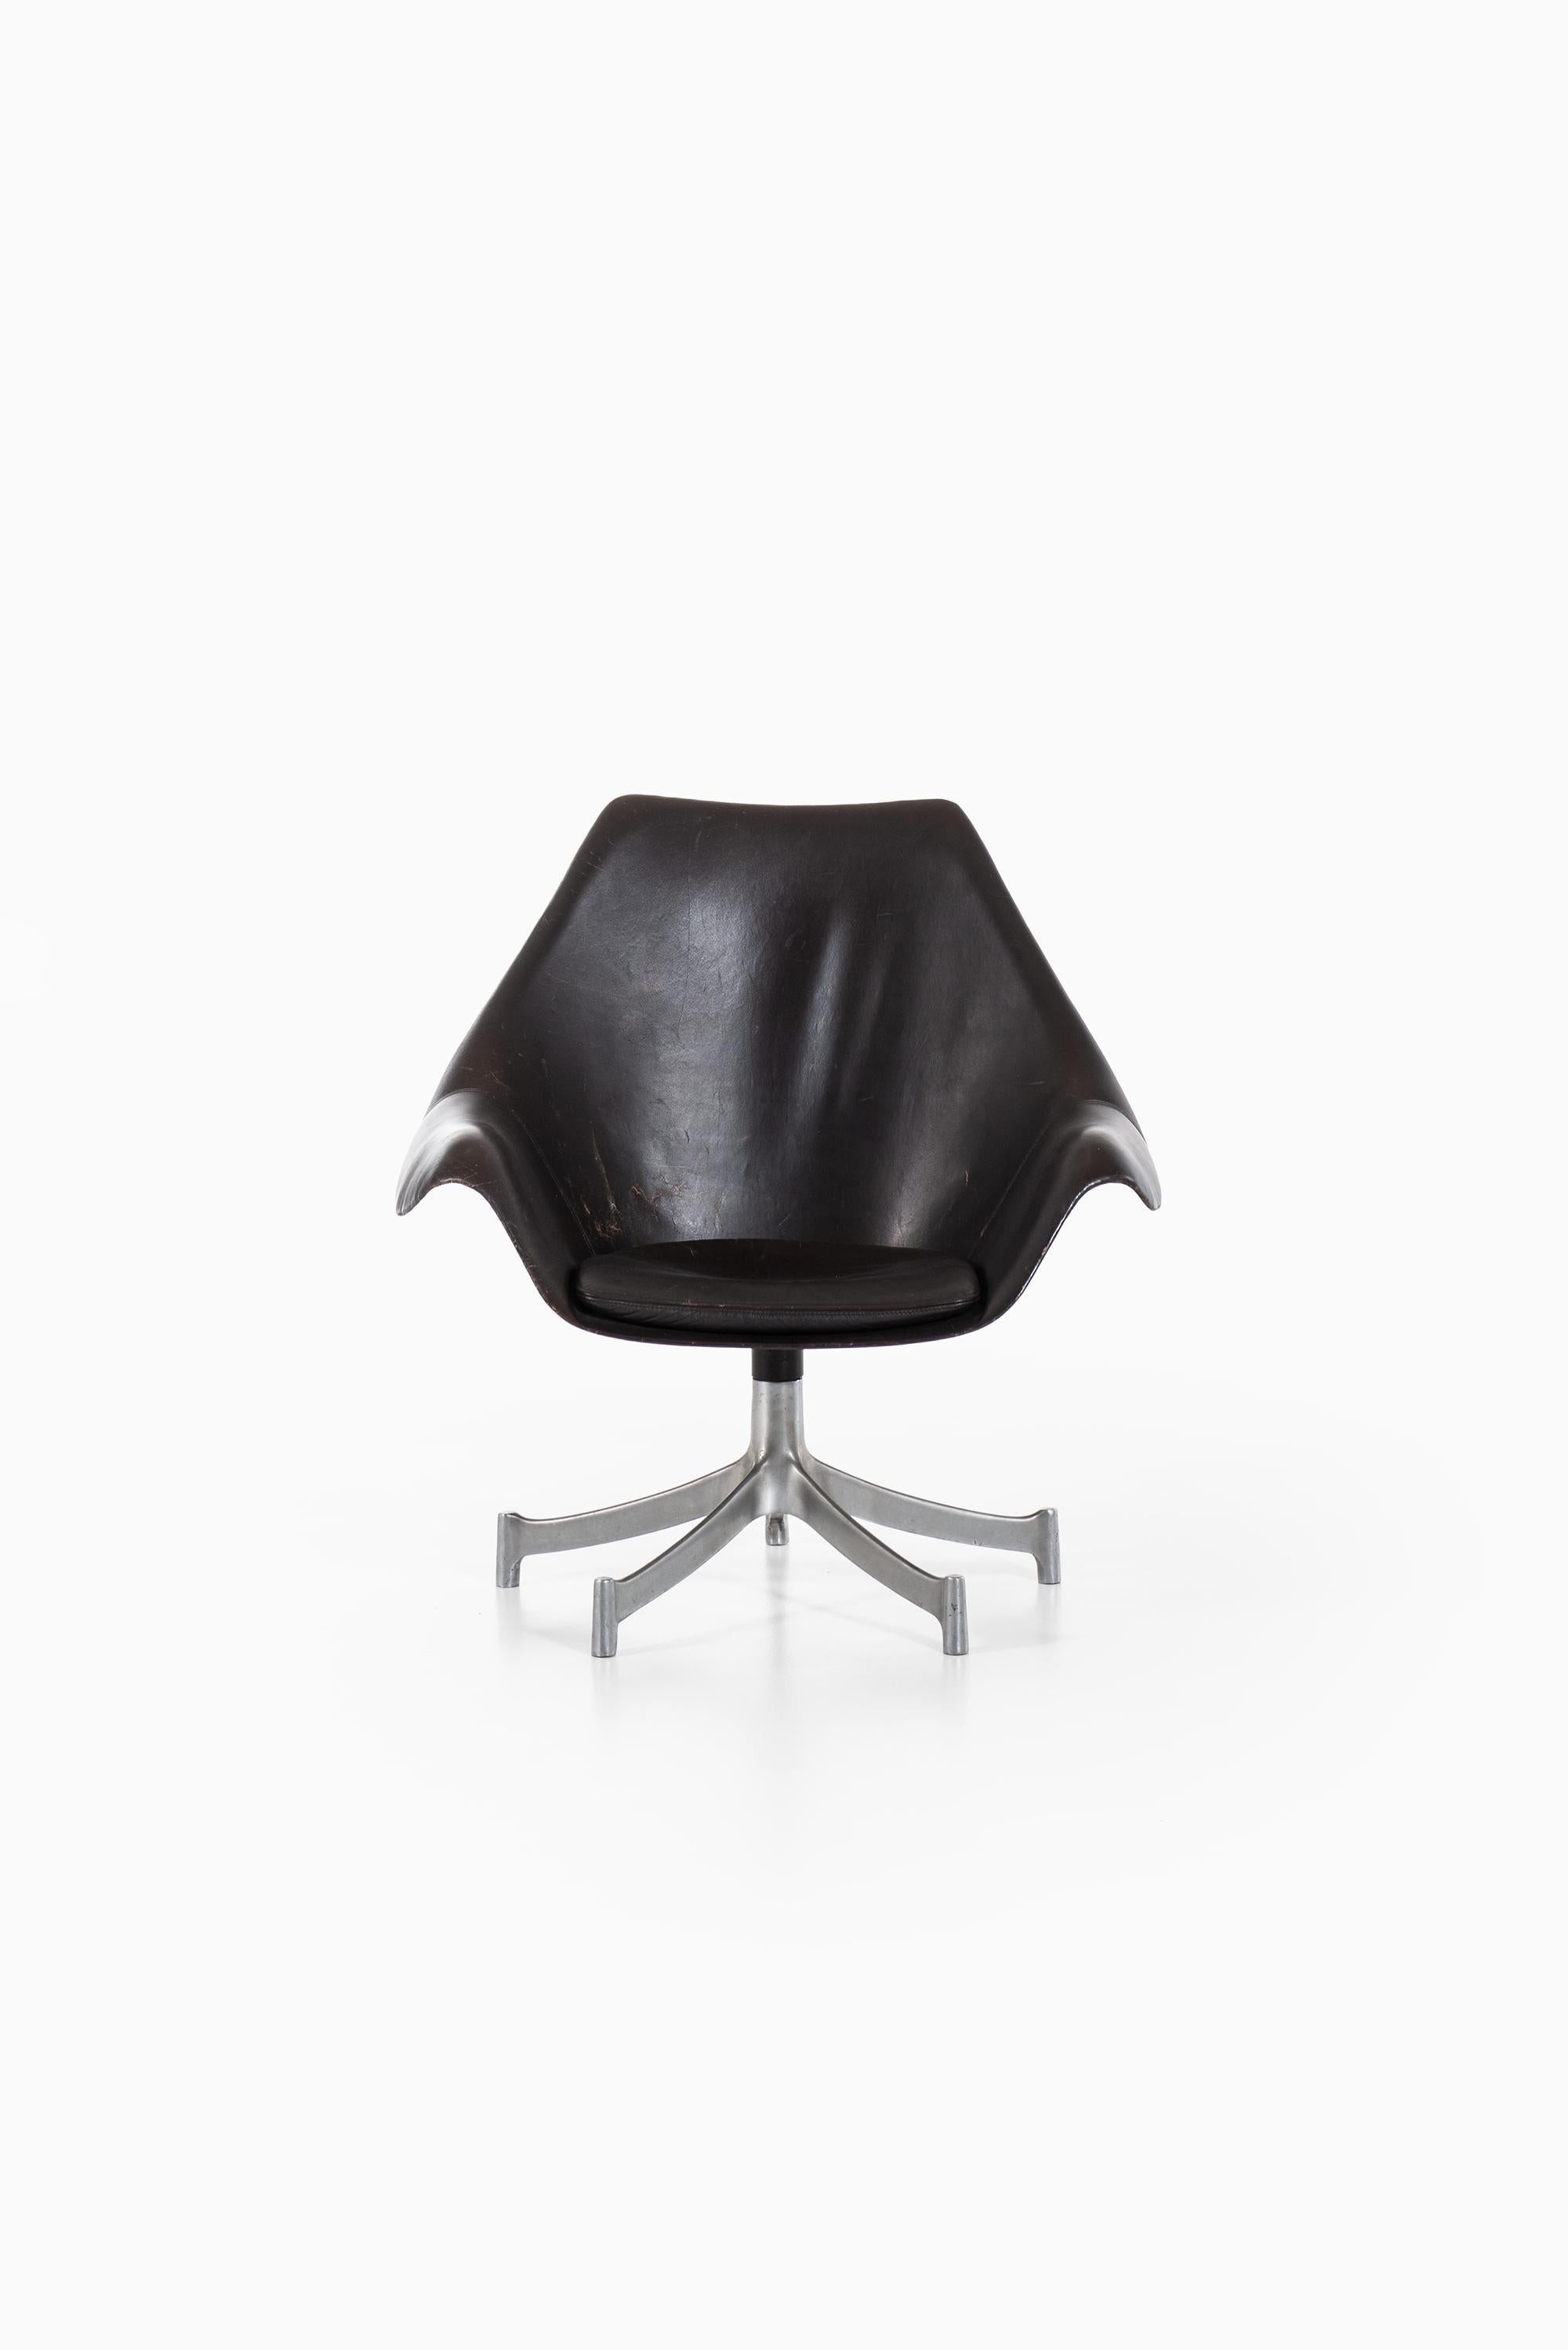 Very rare easy chair designed by Jørgen Lund & Ole Larsen. Produced by Bo-Ex in Denmark.